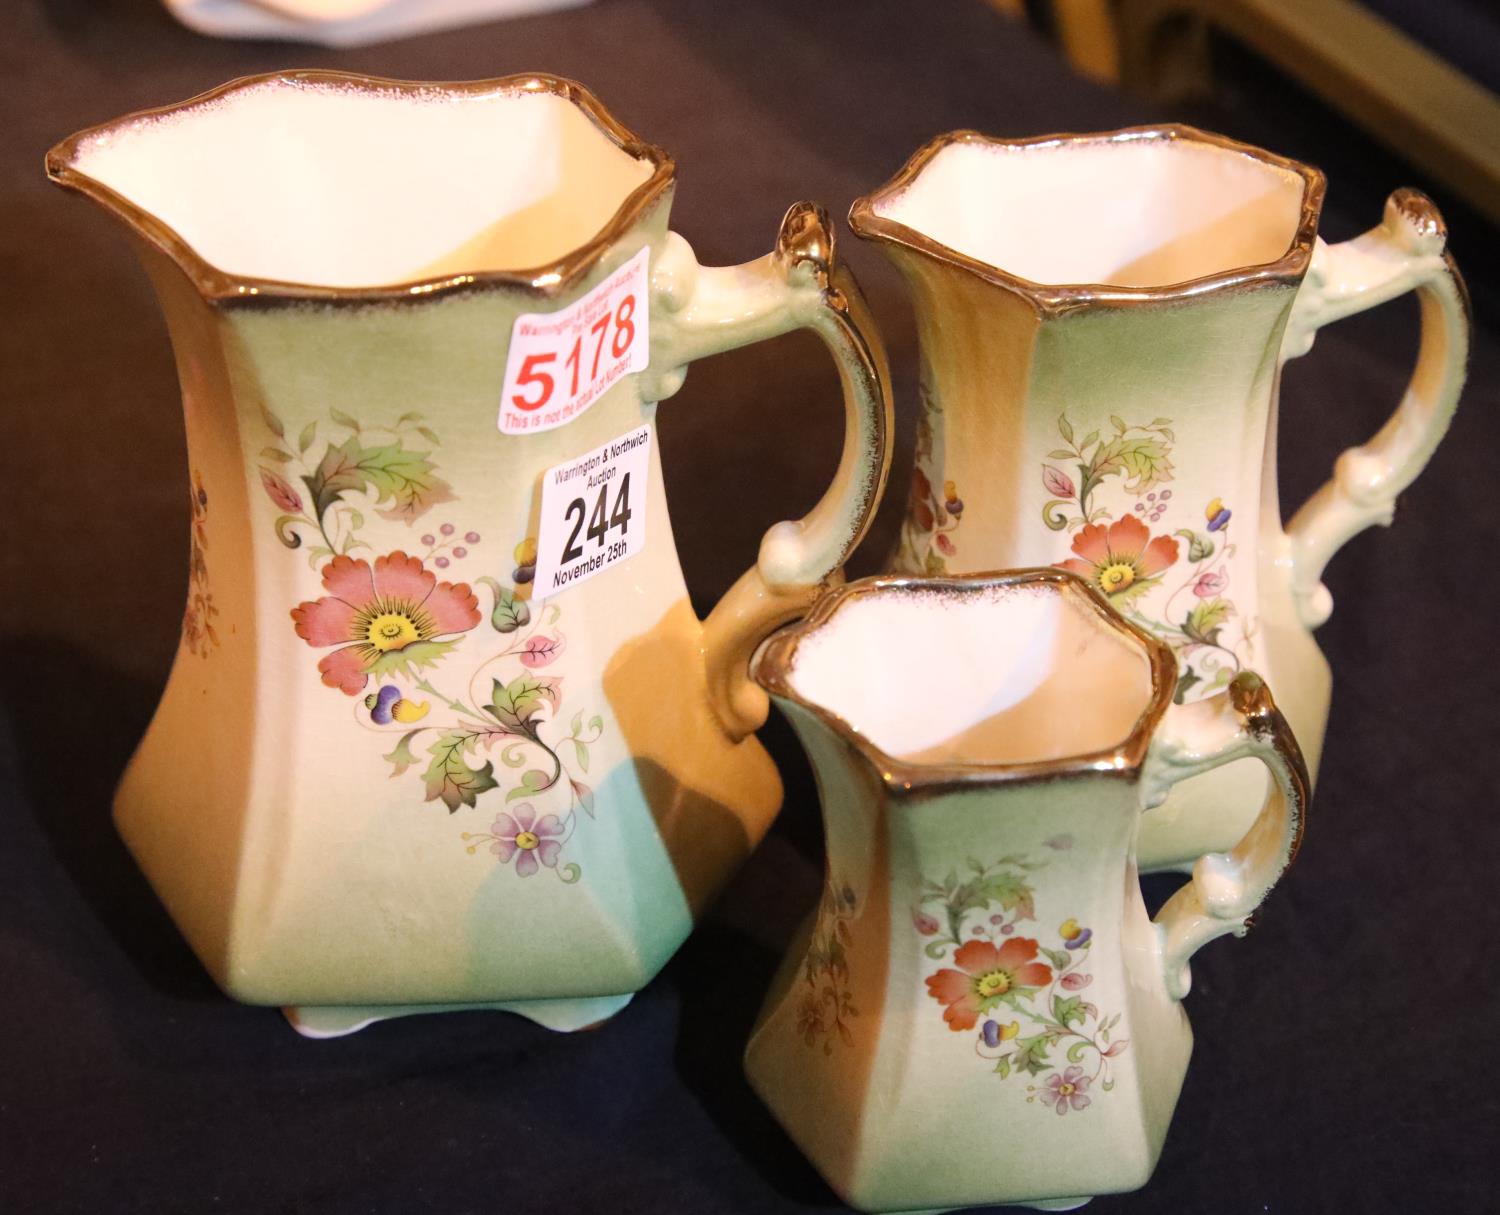 Graduated set of three Staffordshire jugs. Not available for in-house P&P